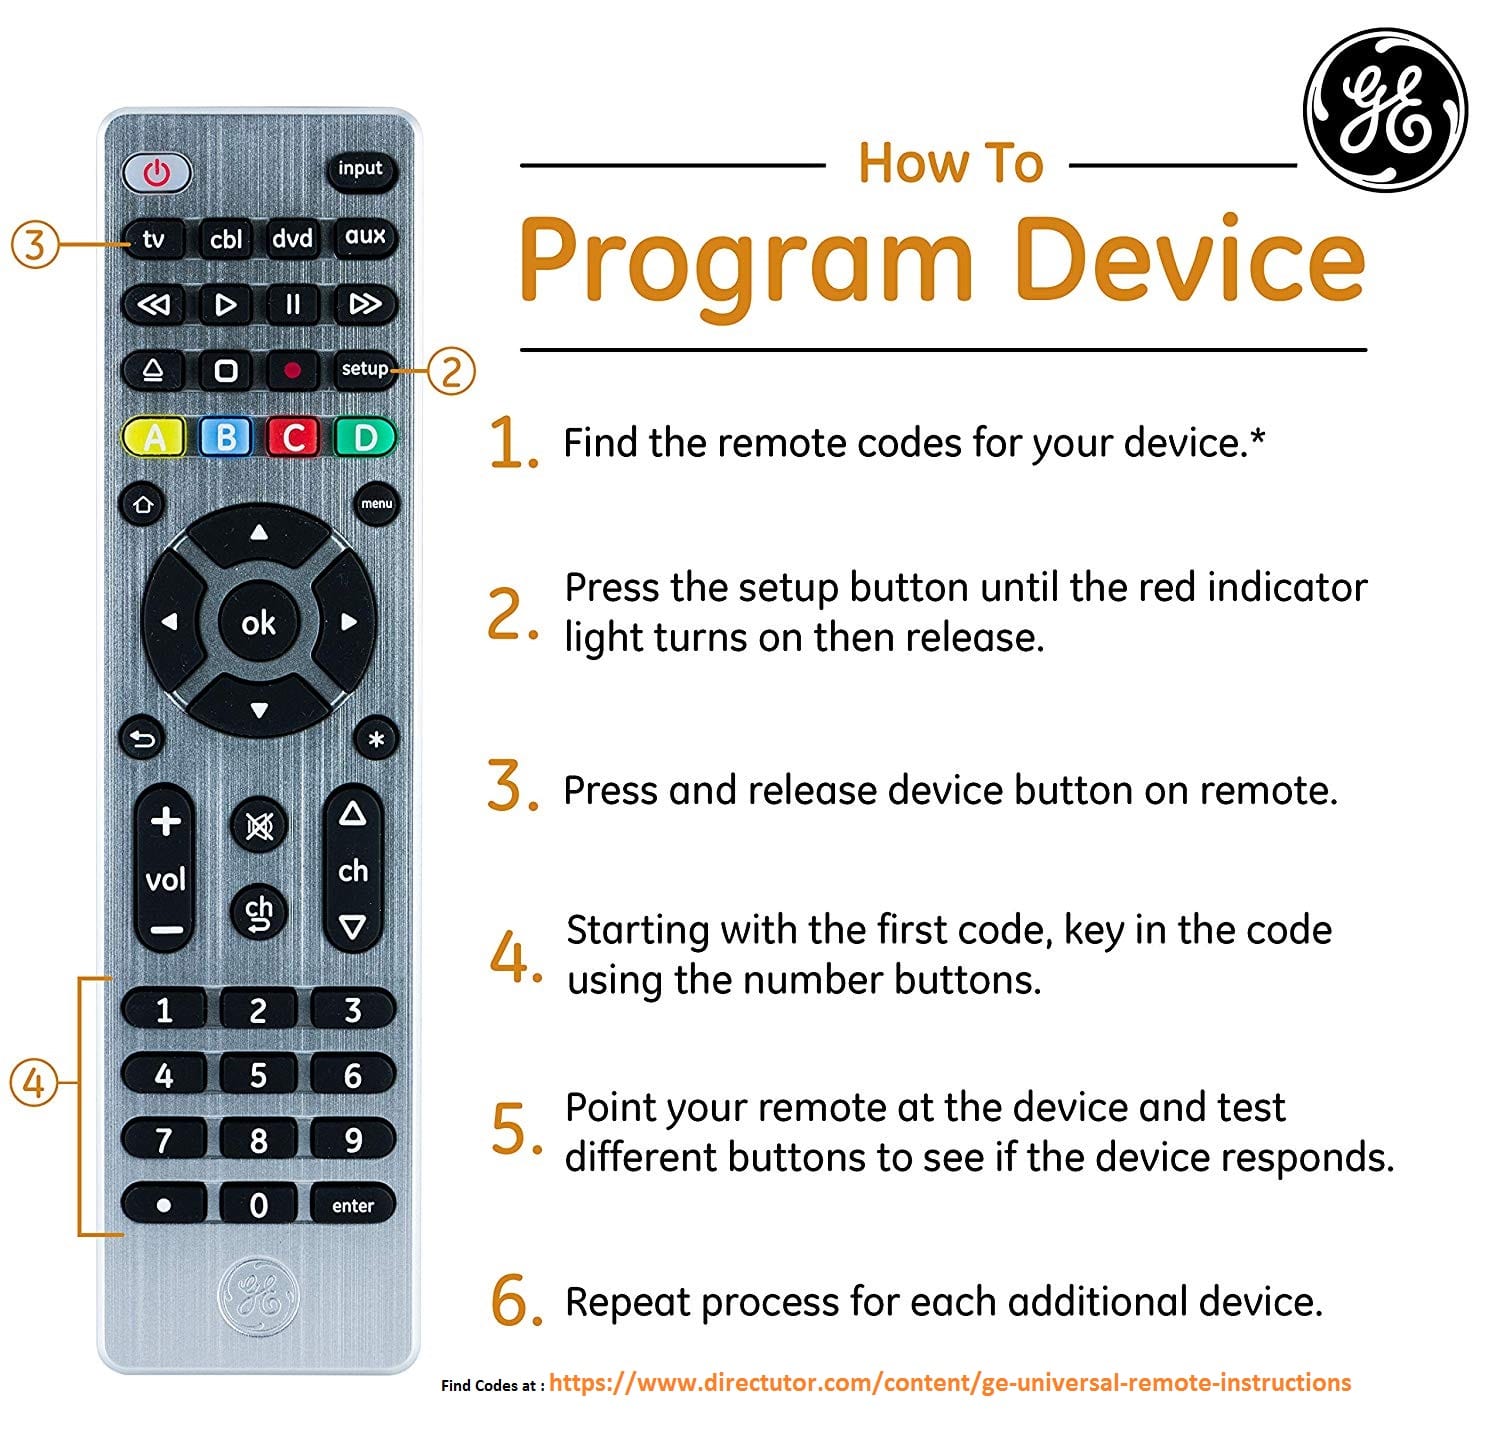 How to program a RCA Universal remote